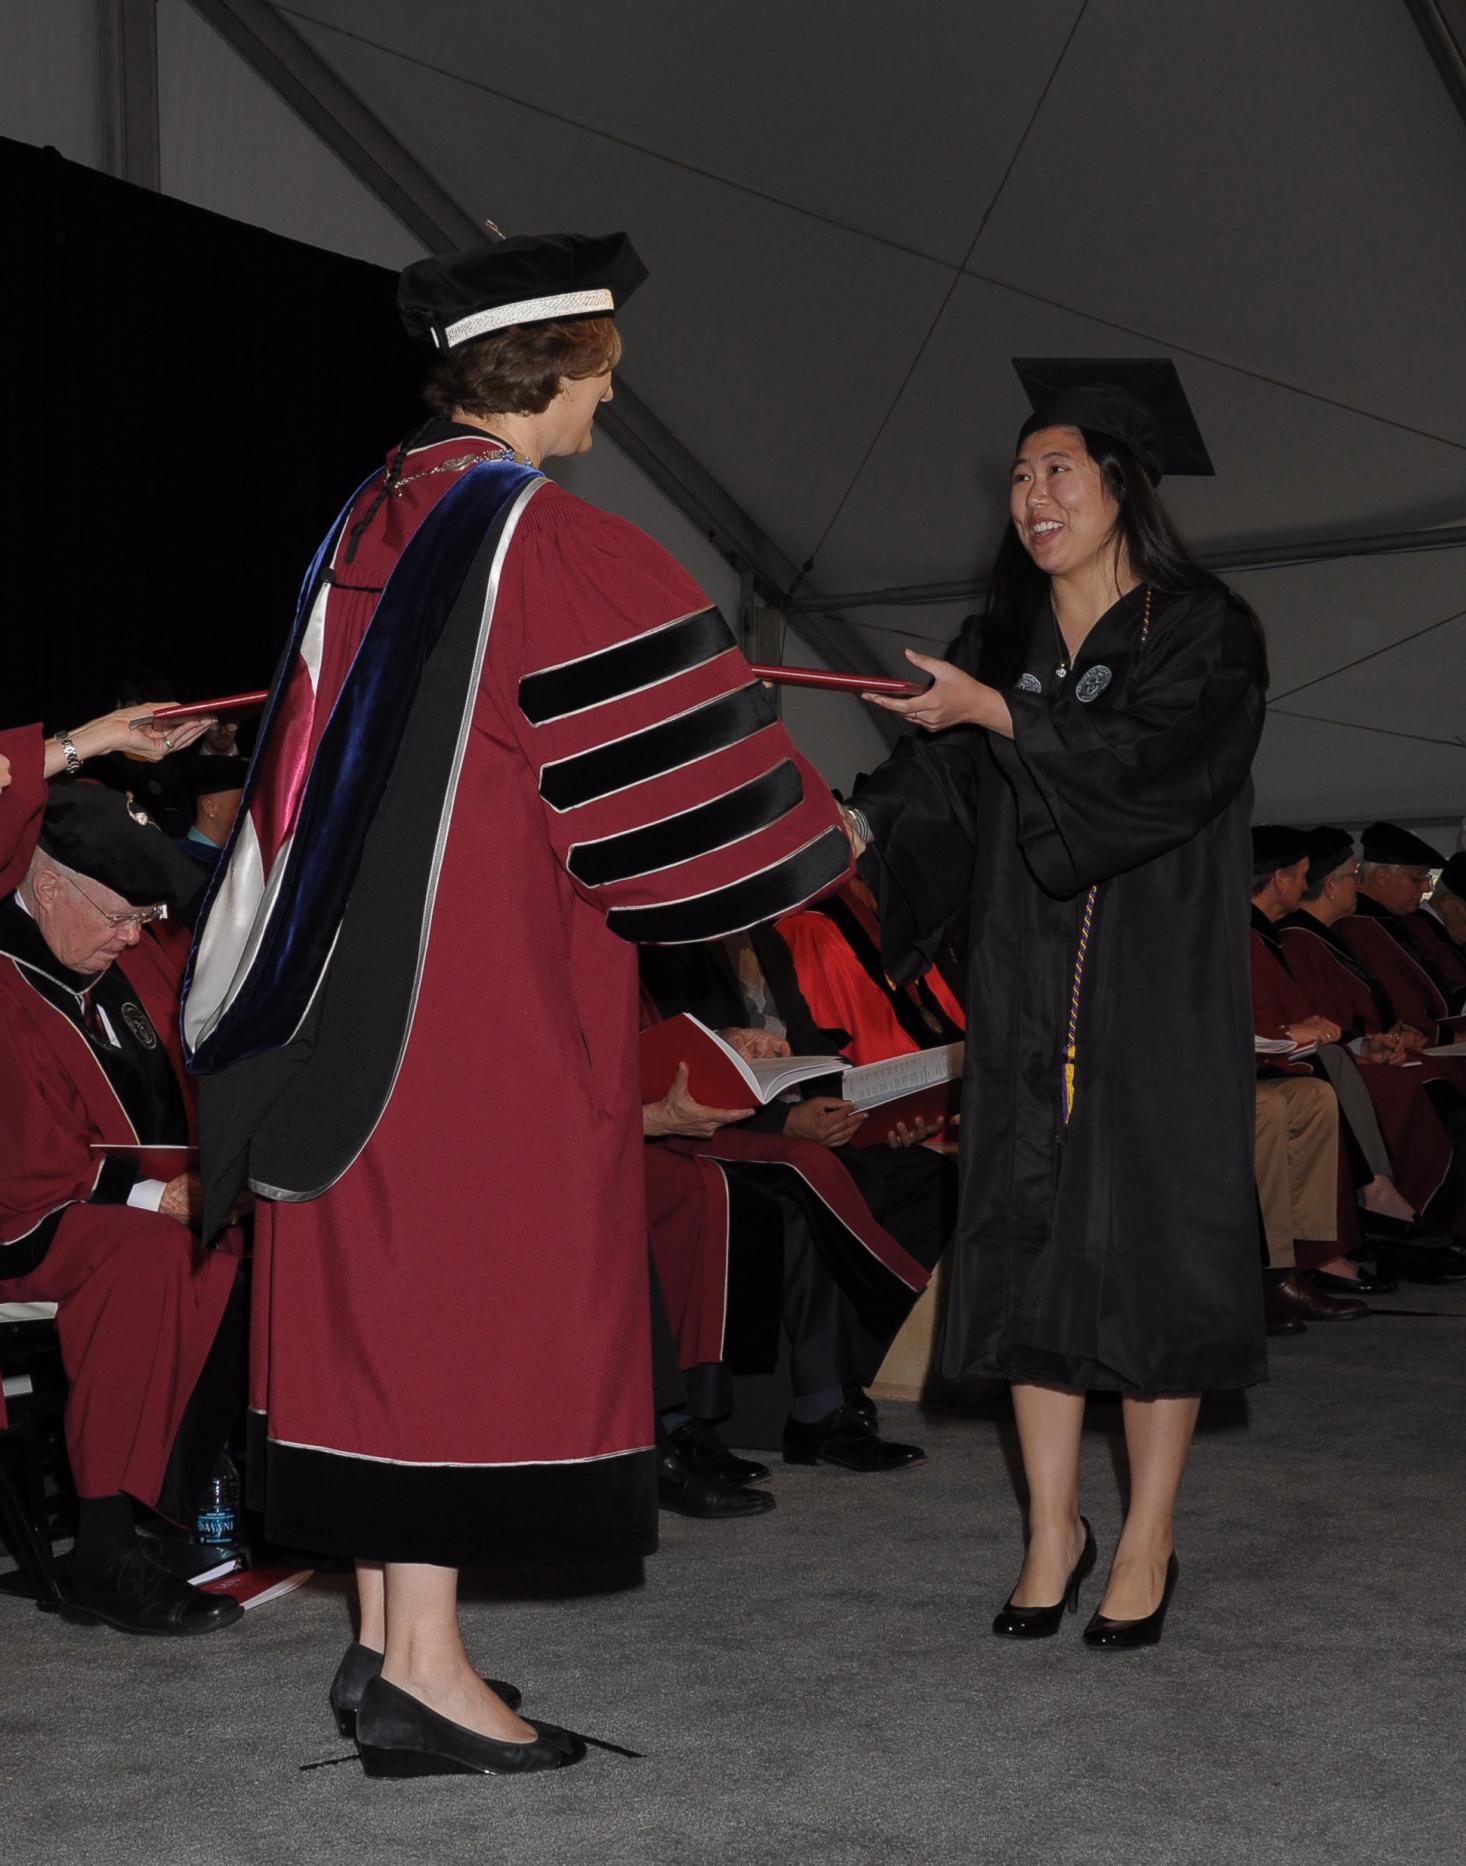 Laurie Leshin giving diploma to student